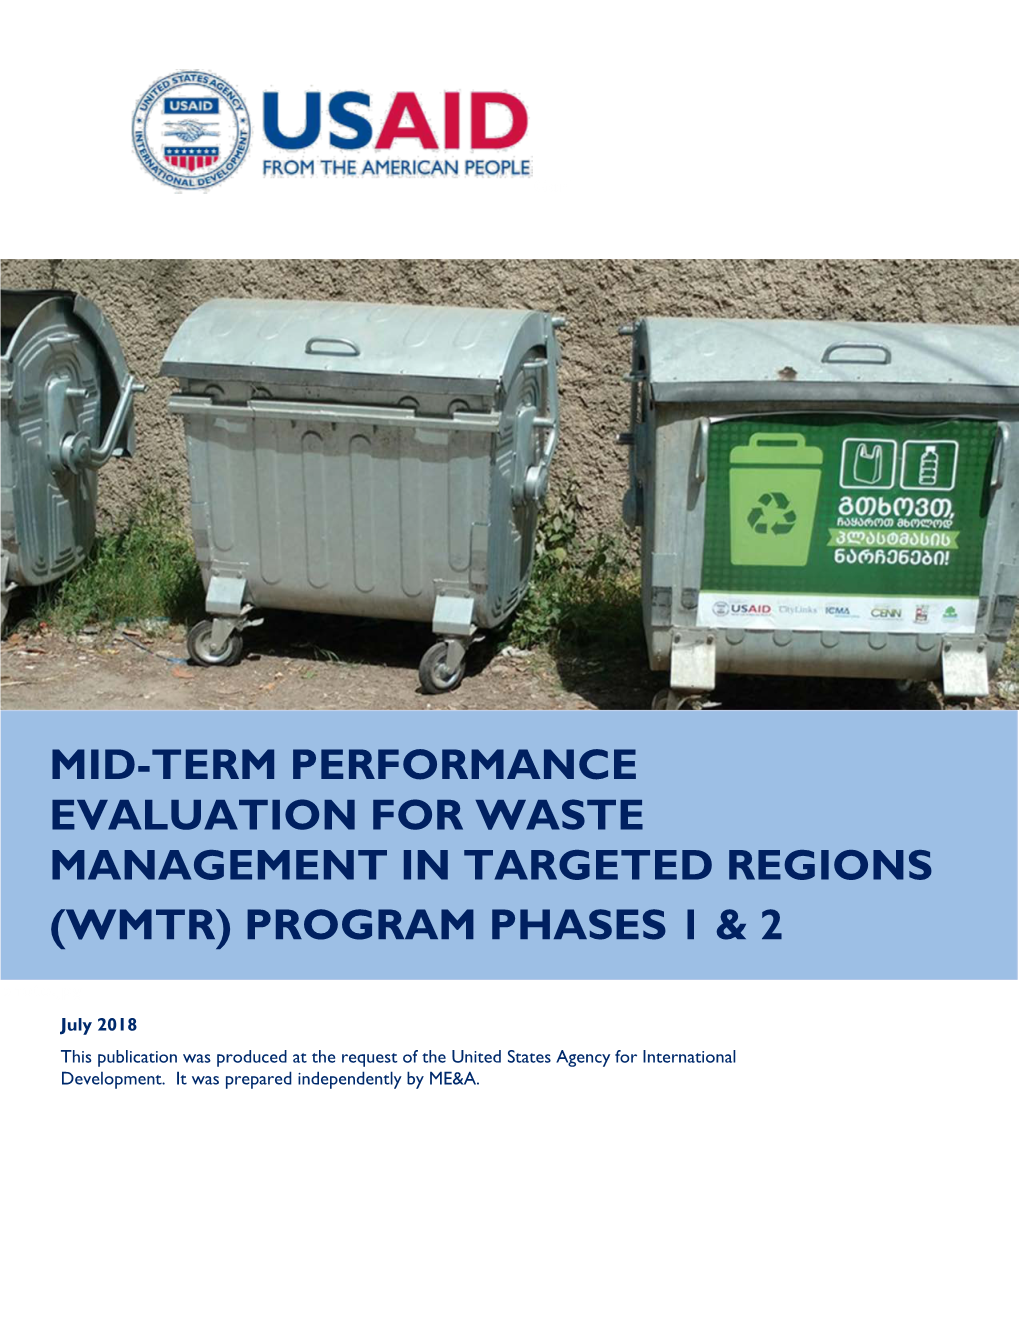 Mid-Term Performance Evaluation for Waste Management in Targeted Regions